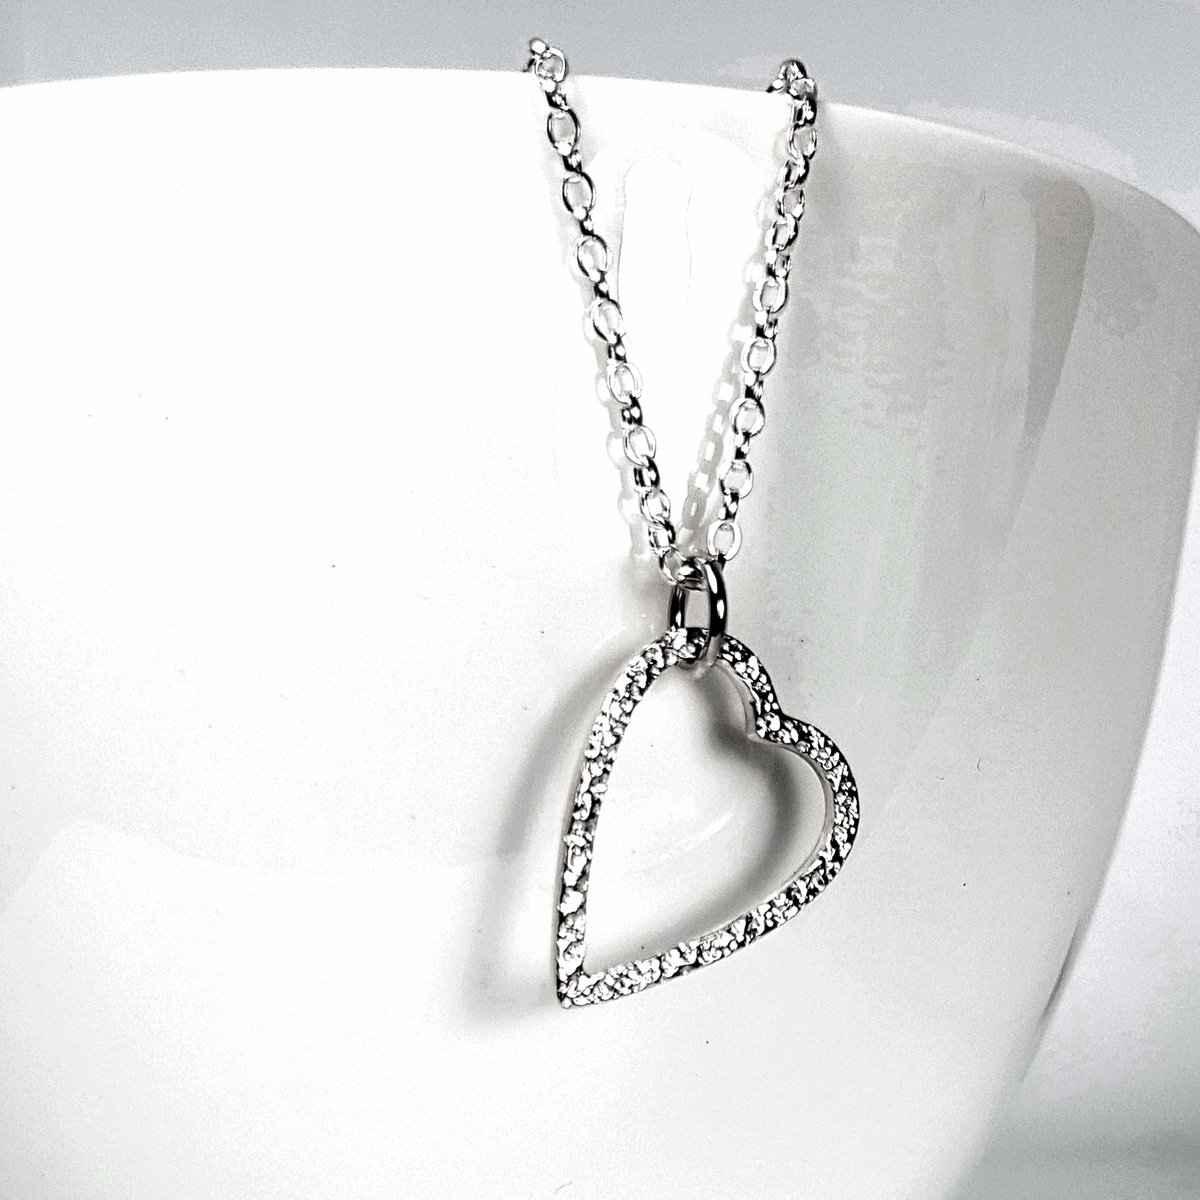 Image of Sterling Silver Heart Pendant Necklace, Textured Heart Necklace (Go Grace)